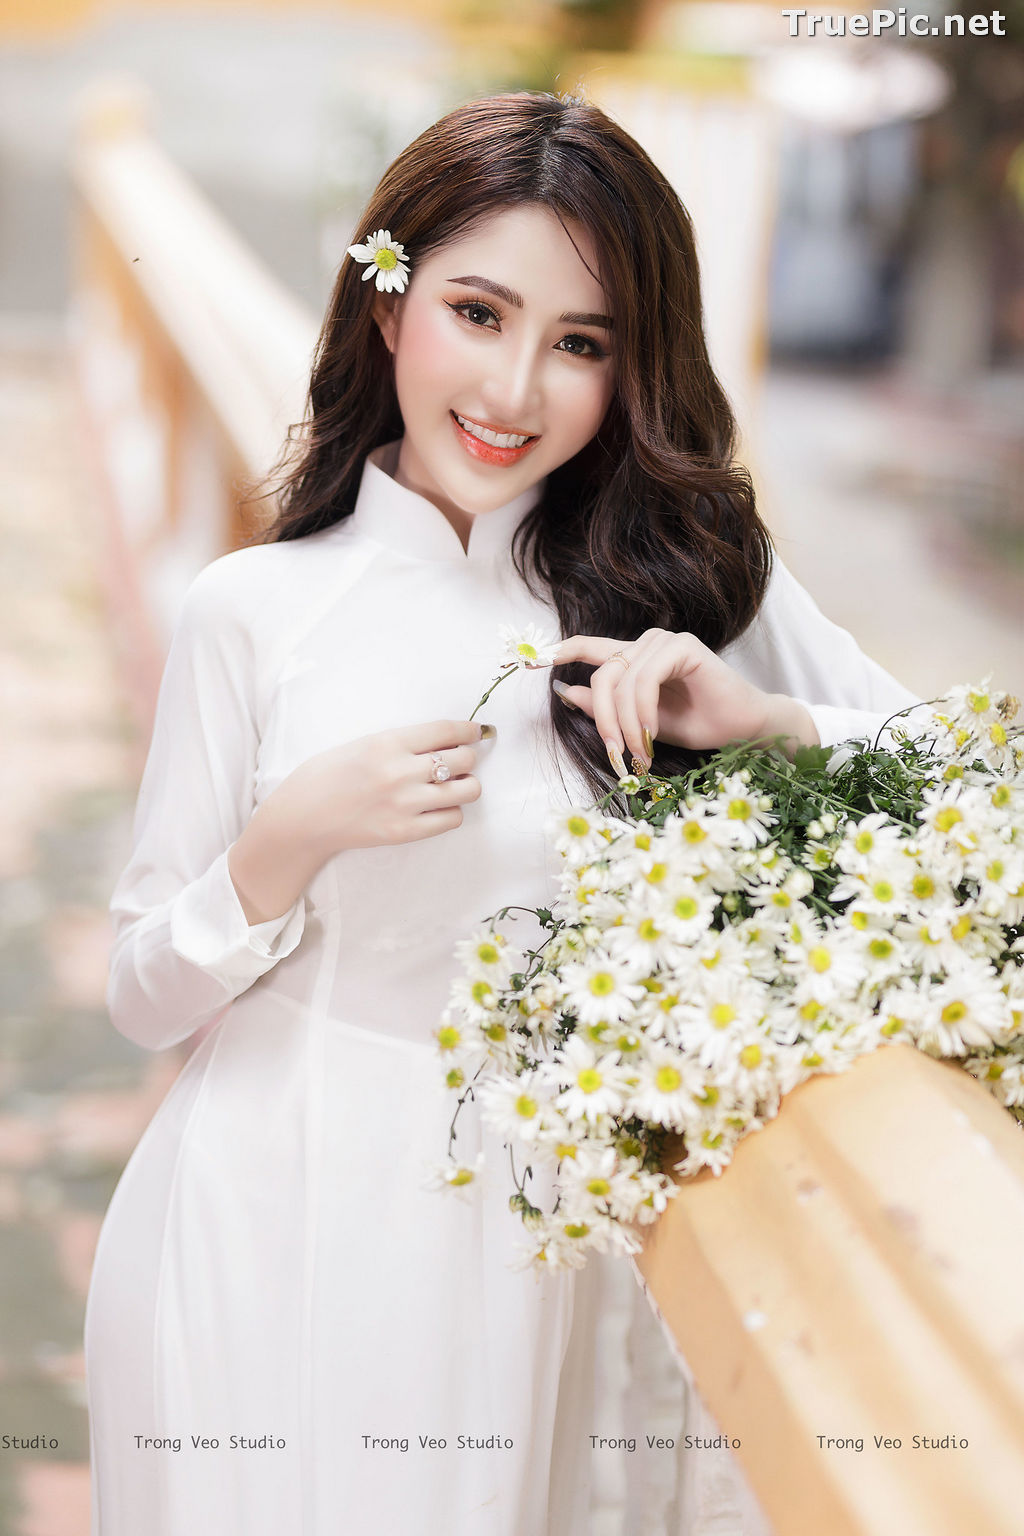 Image The Beauty of Vietnamese Girls with Traditional Dress (Ao Dai) #3 - TruePic.net - Picture-12